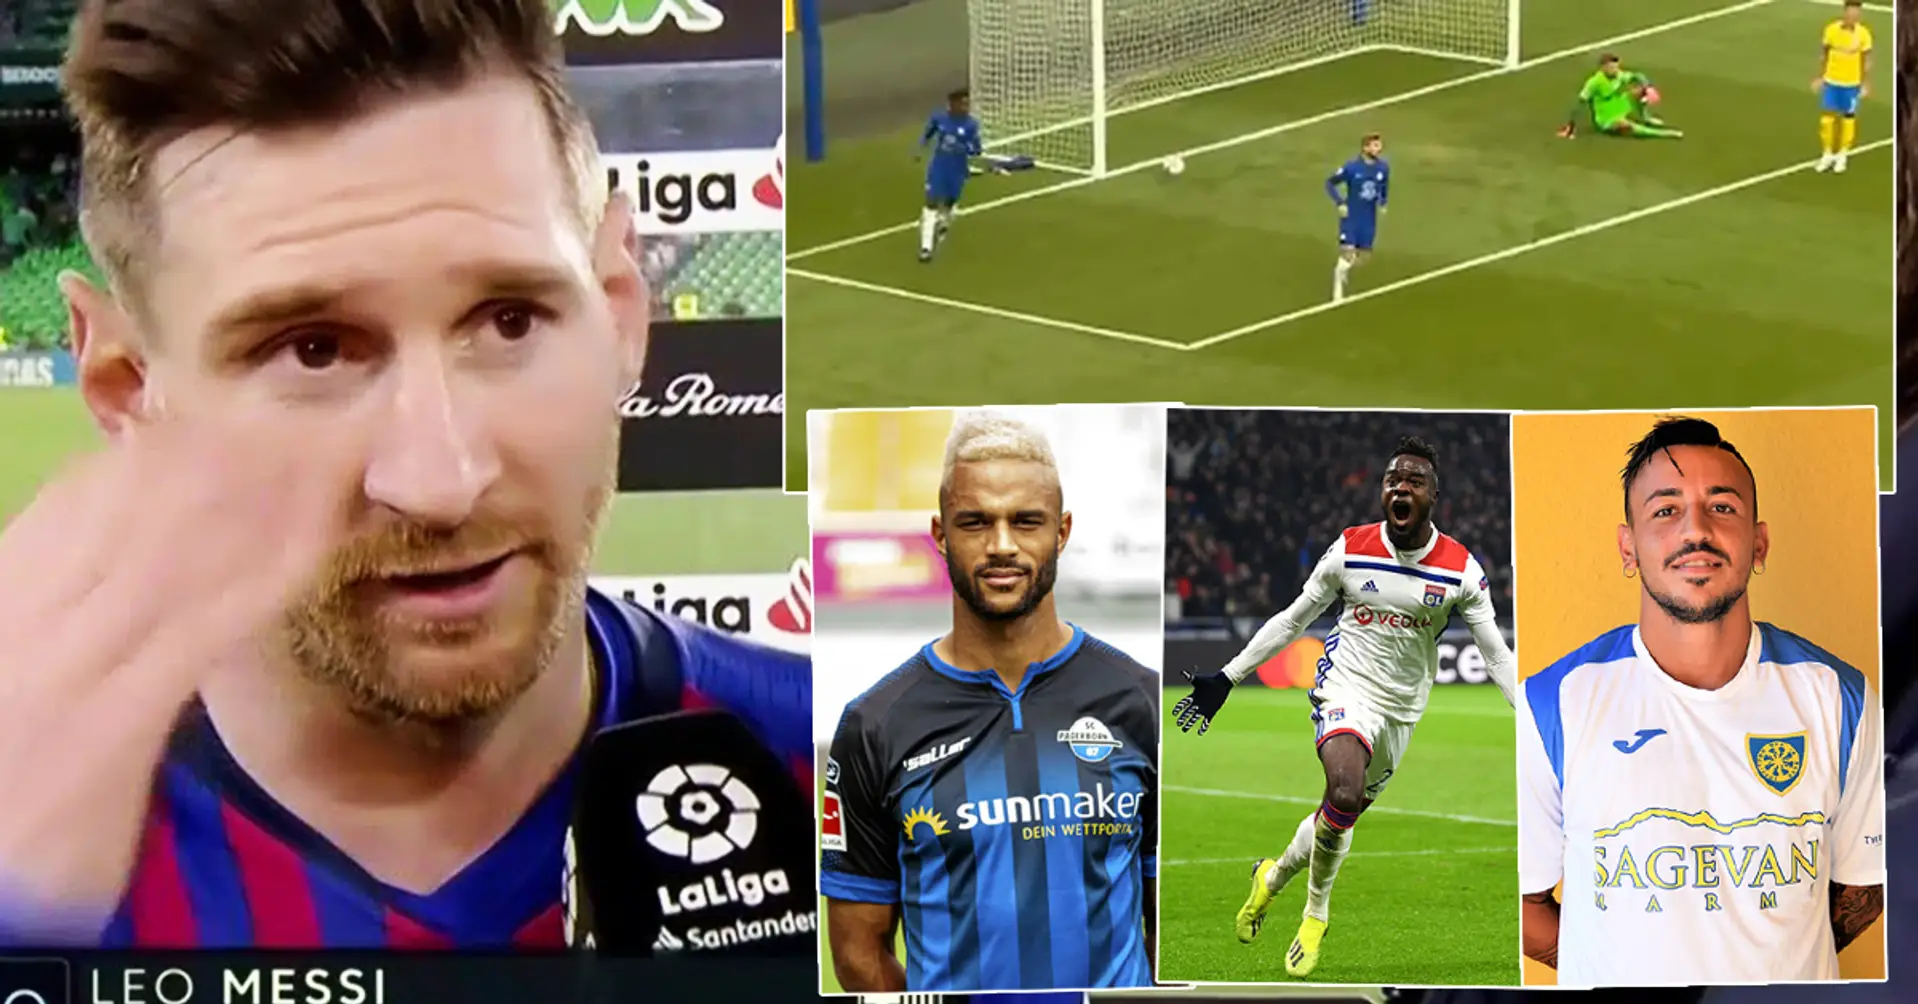 In 2015, Leo Messi picked 10 talents to become future stars - where are they now?